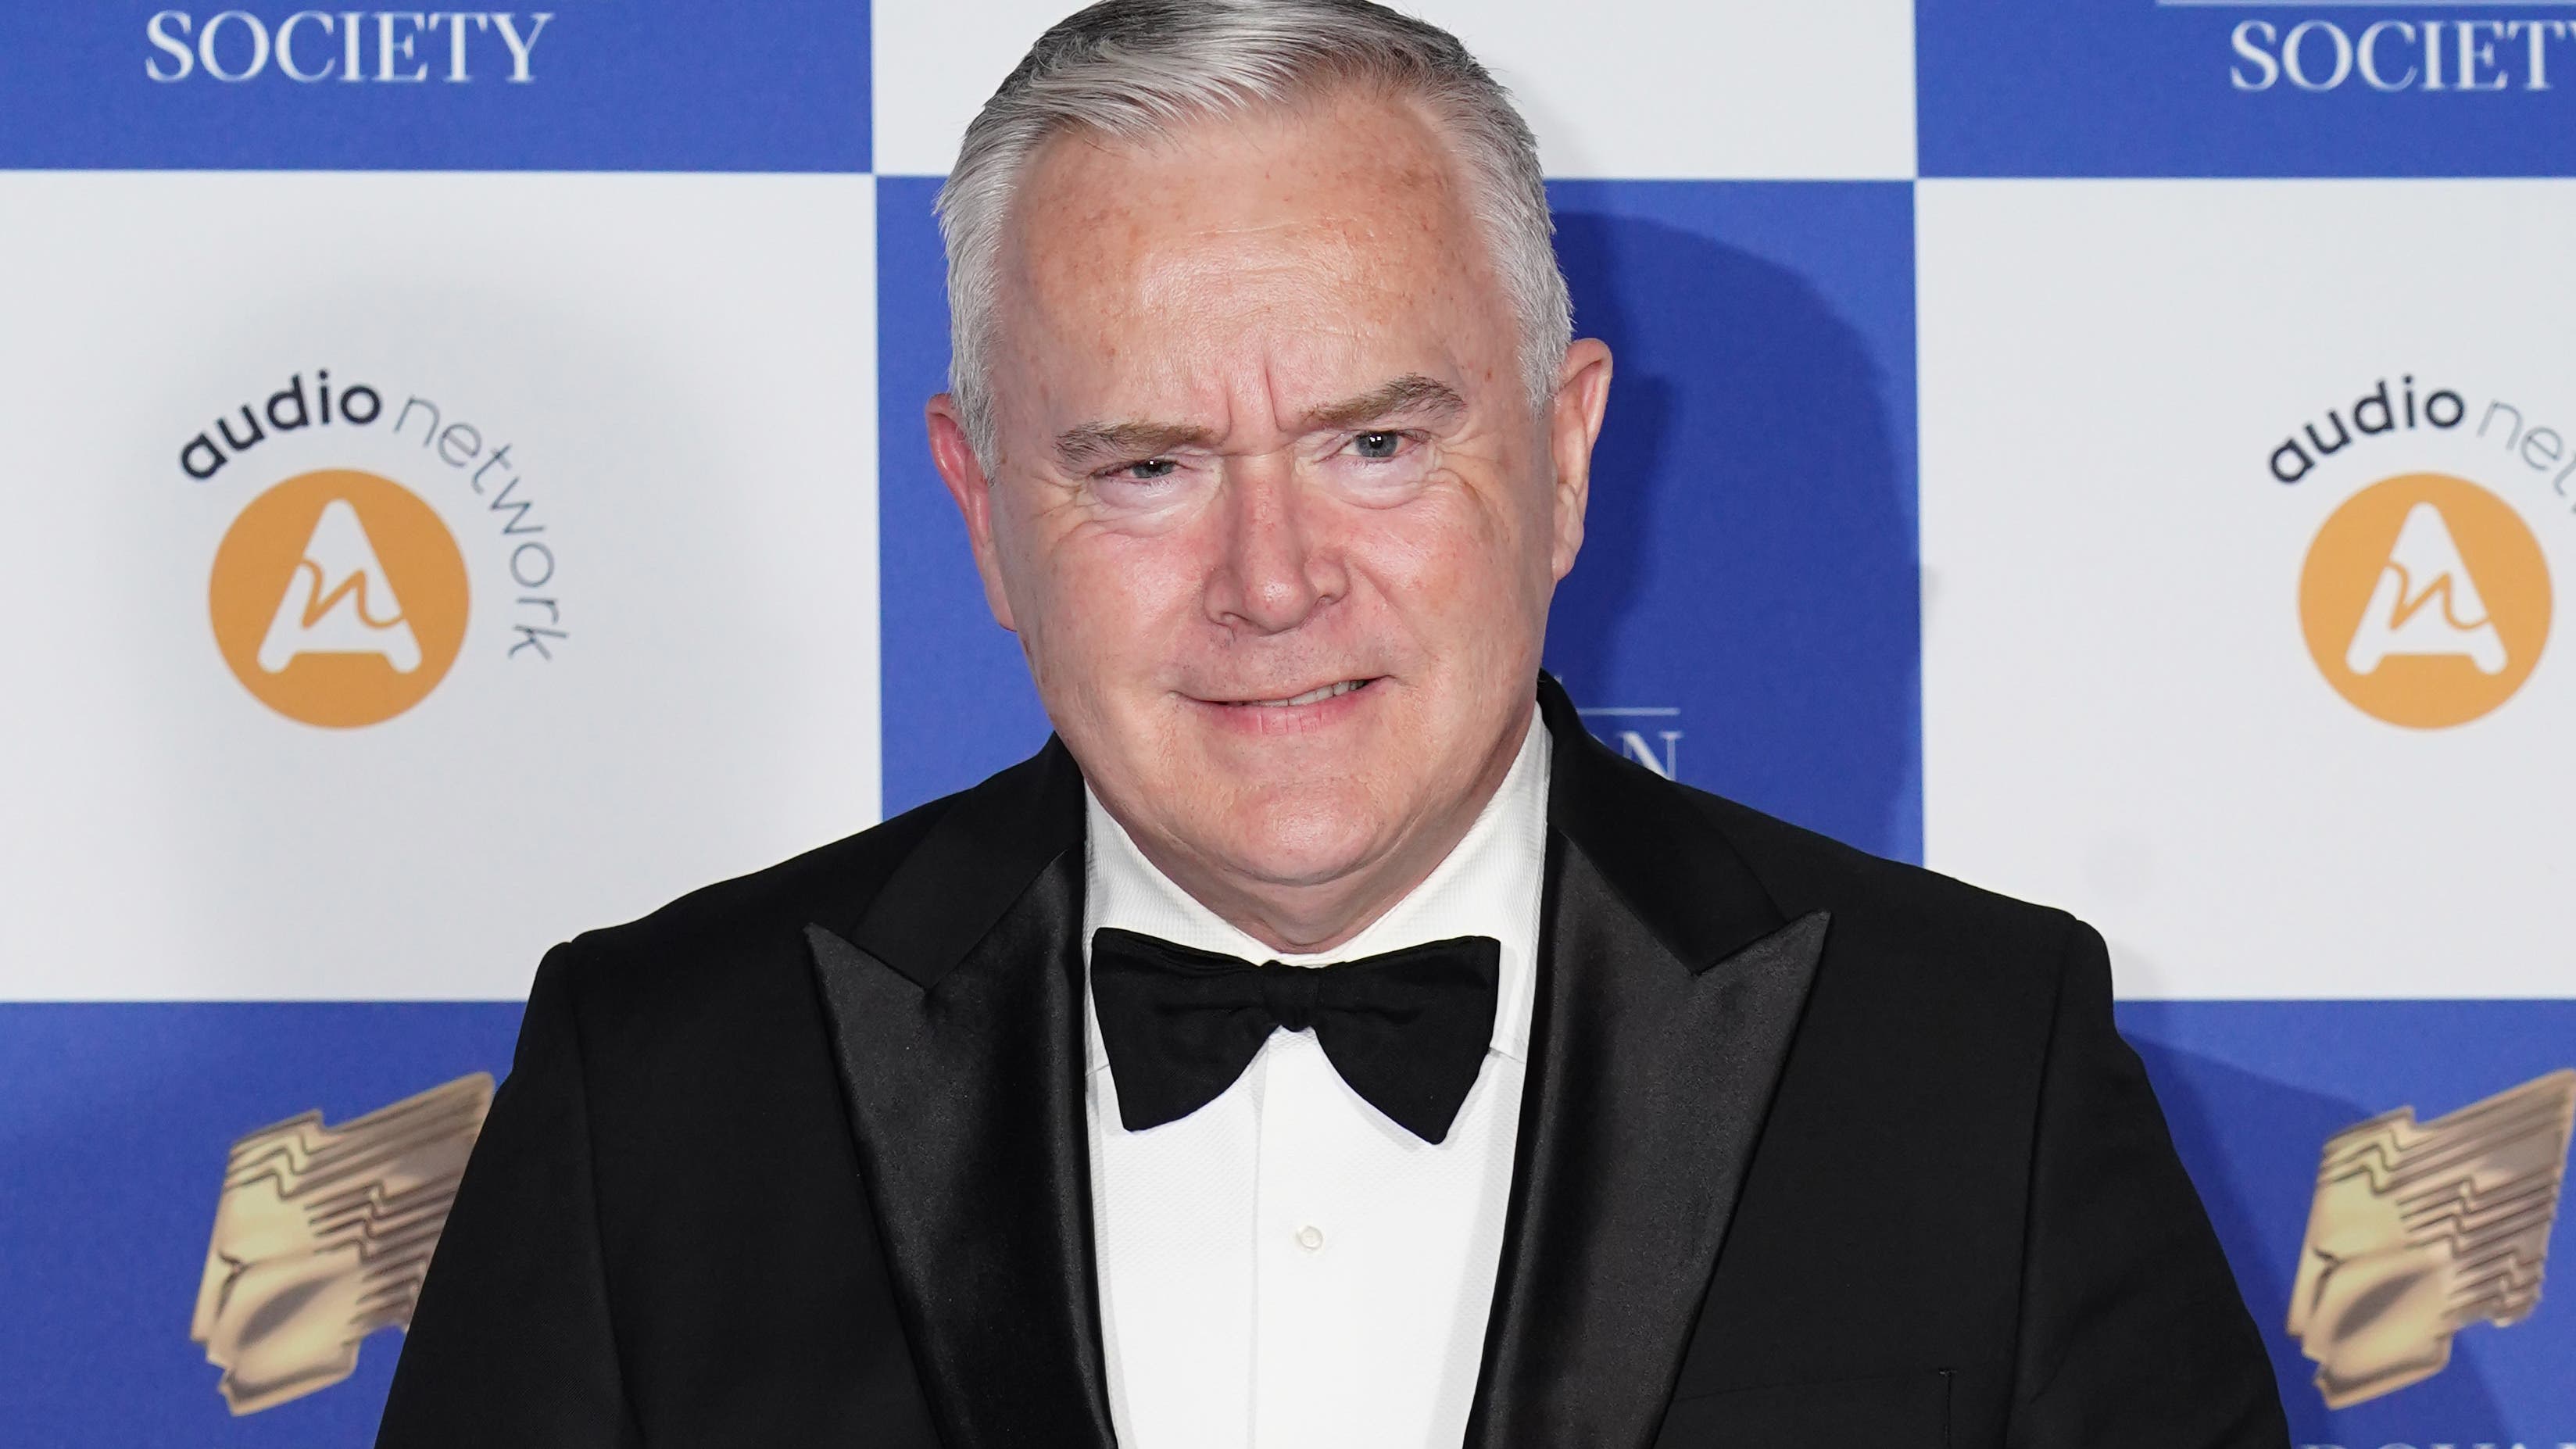 Former BBC presenter Huw Edwards charged with making indecent images of children